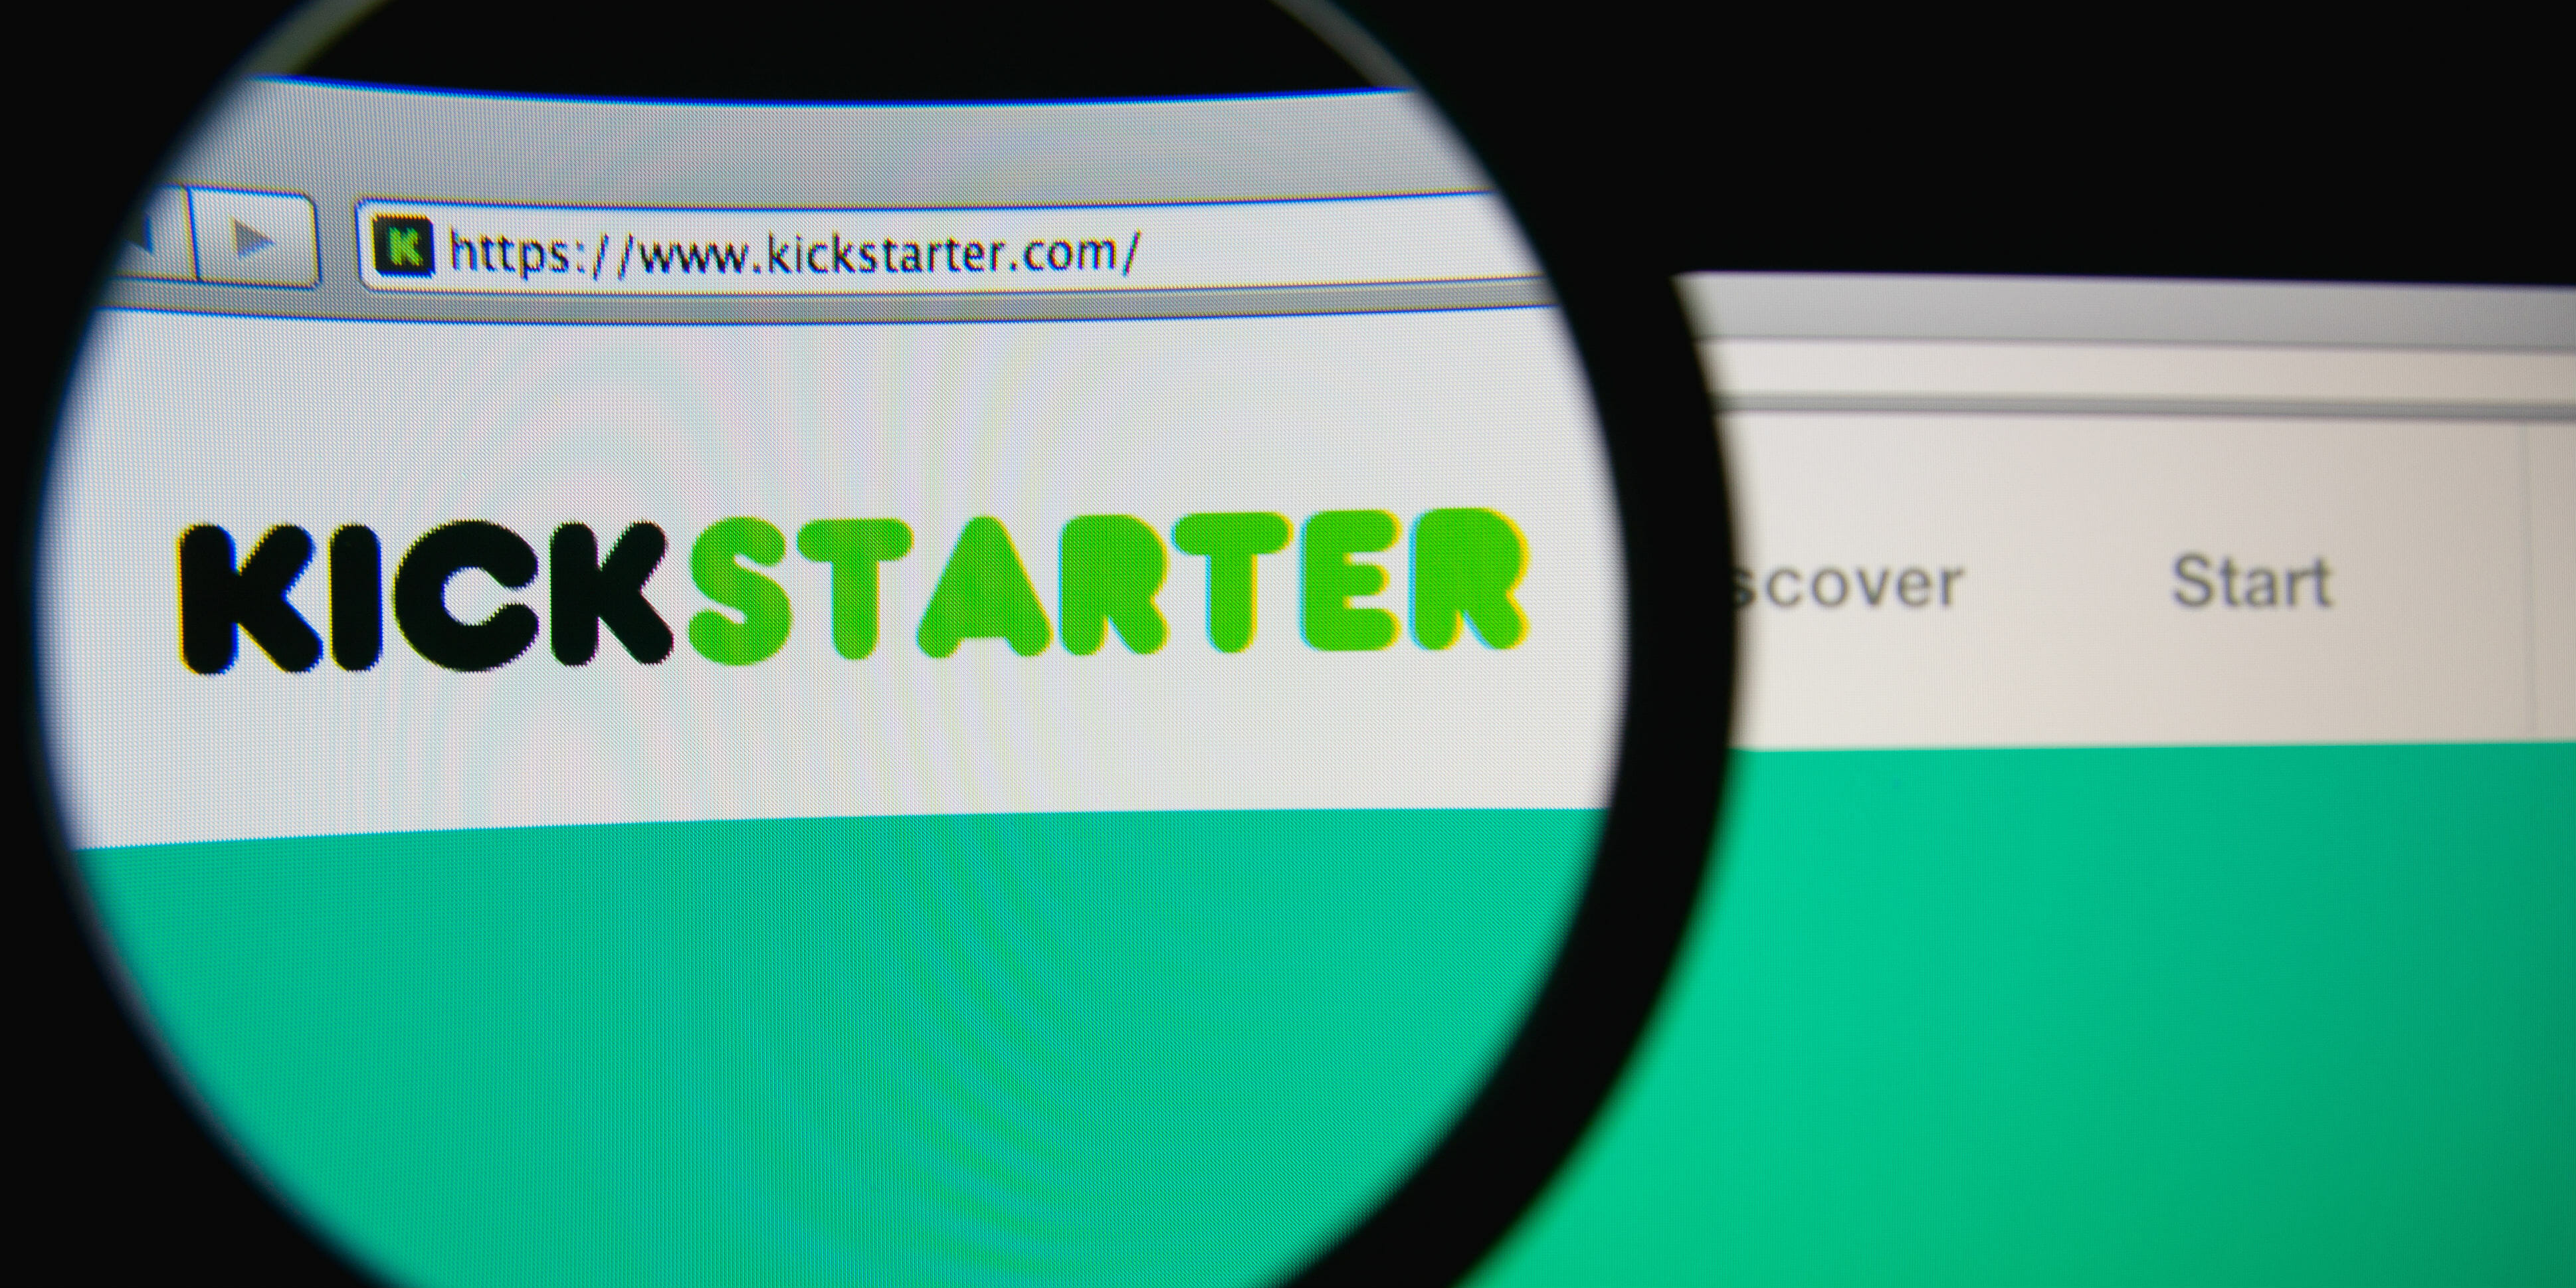 What Is Kickstarter And What Do People Use It For?